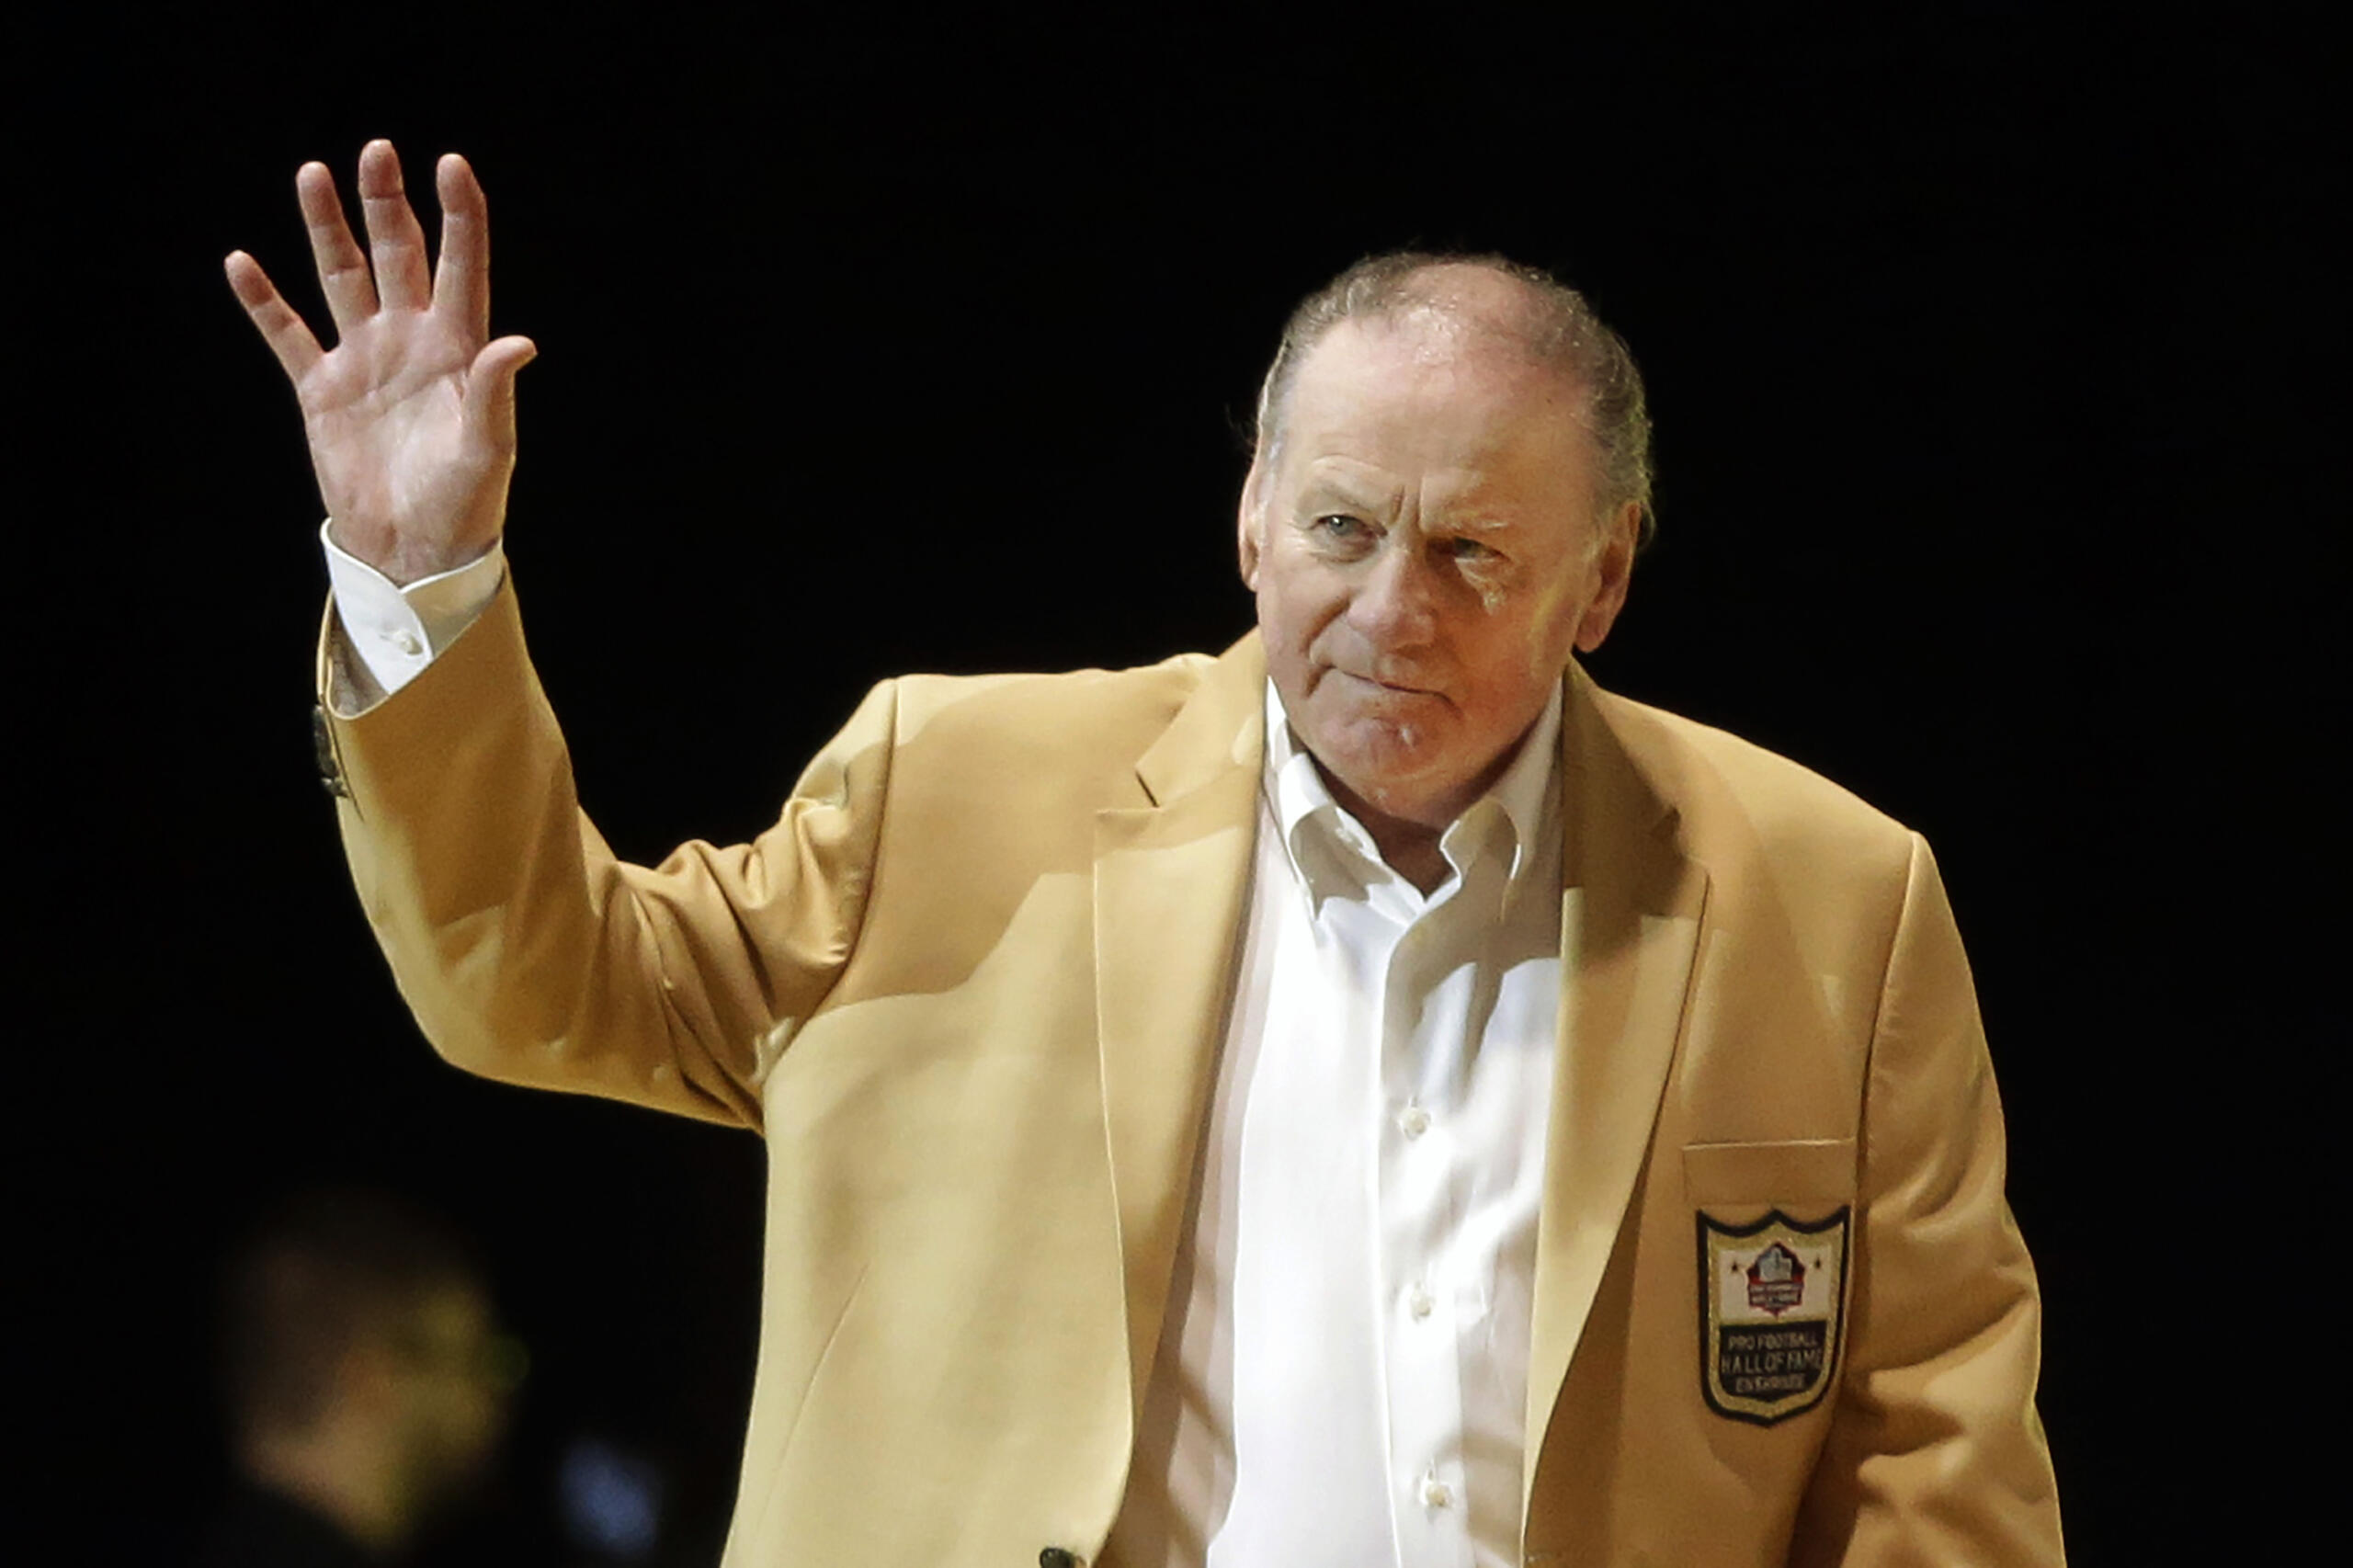 Hall of Fame quarterback Len Dawson, who helped the Kansas City Chiefs to a Super Bowl title, died Wednesday, Aug. 24, 2022. He was 87.